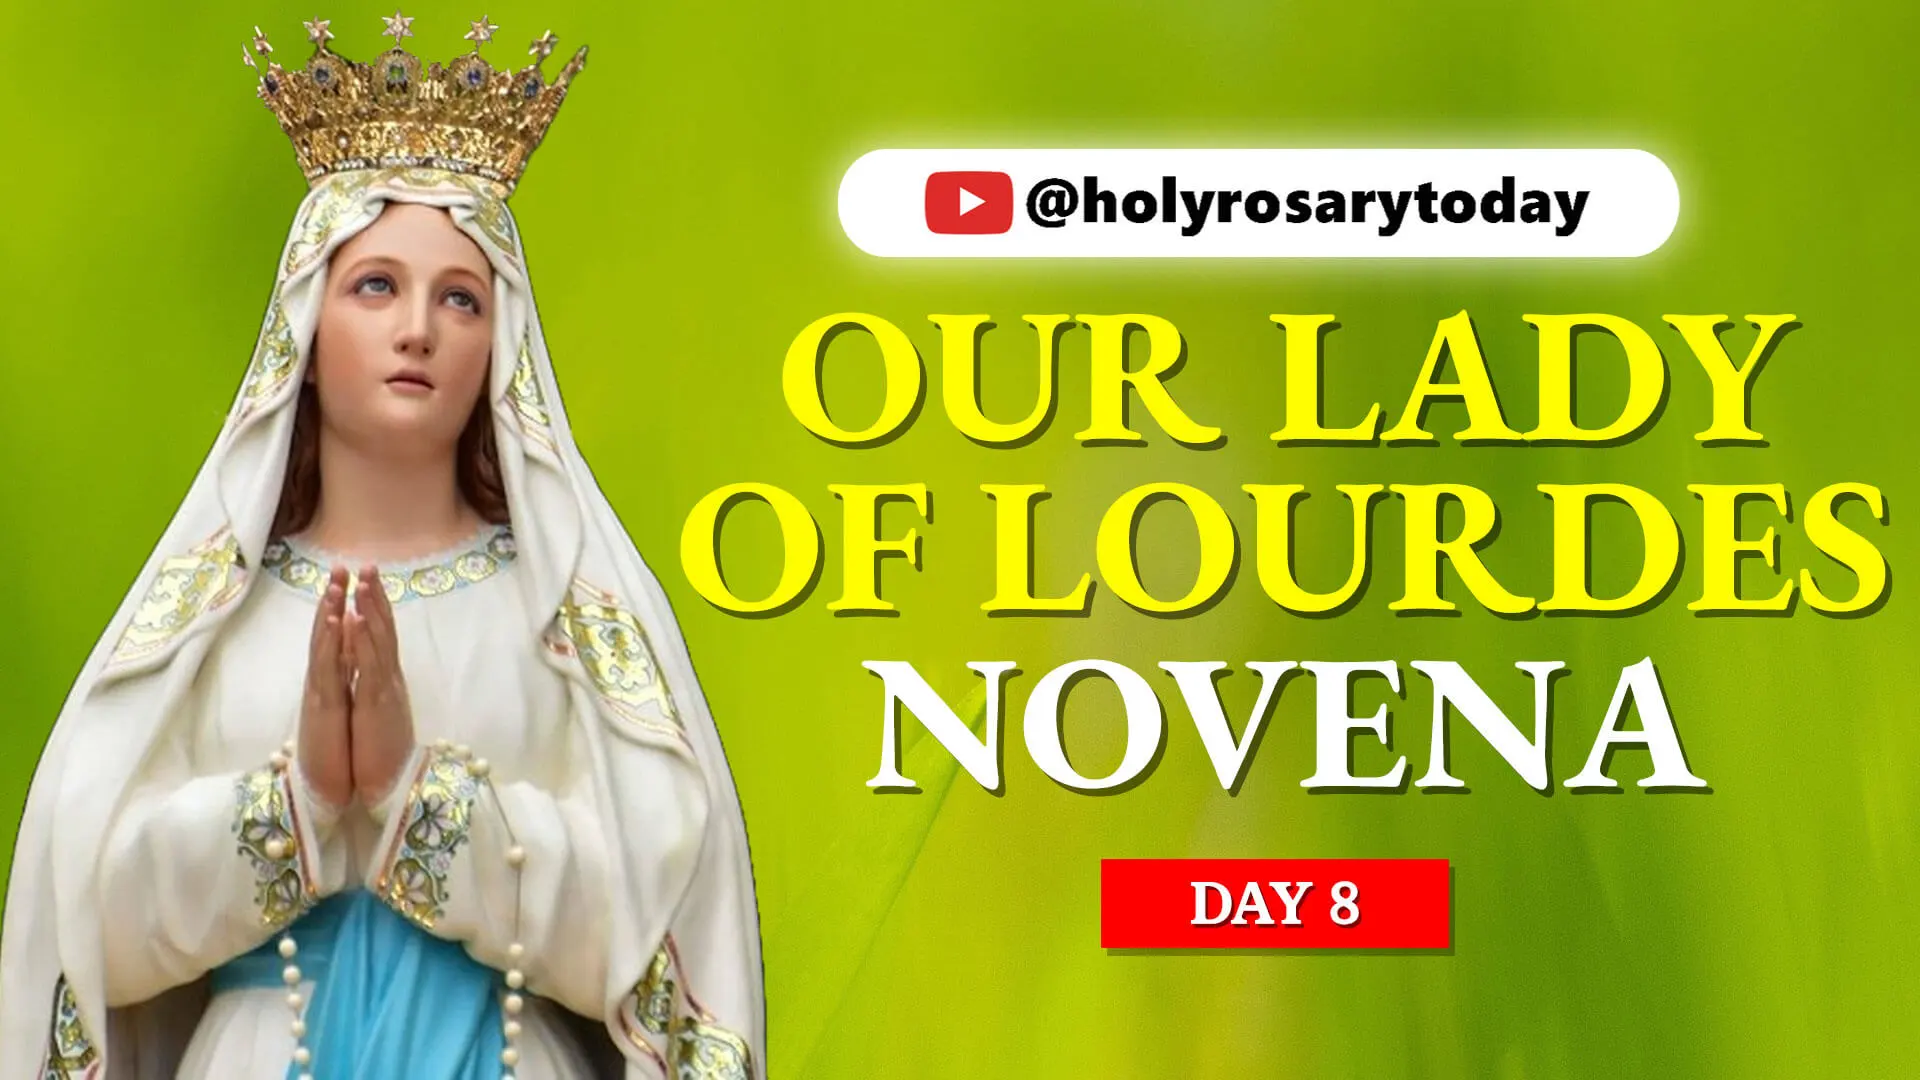 Our Lady of Lourdes Novena Day 8